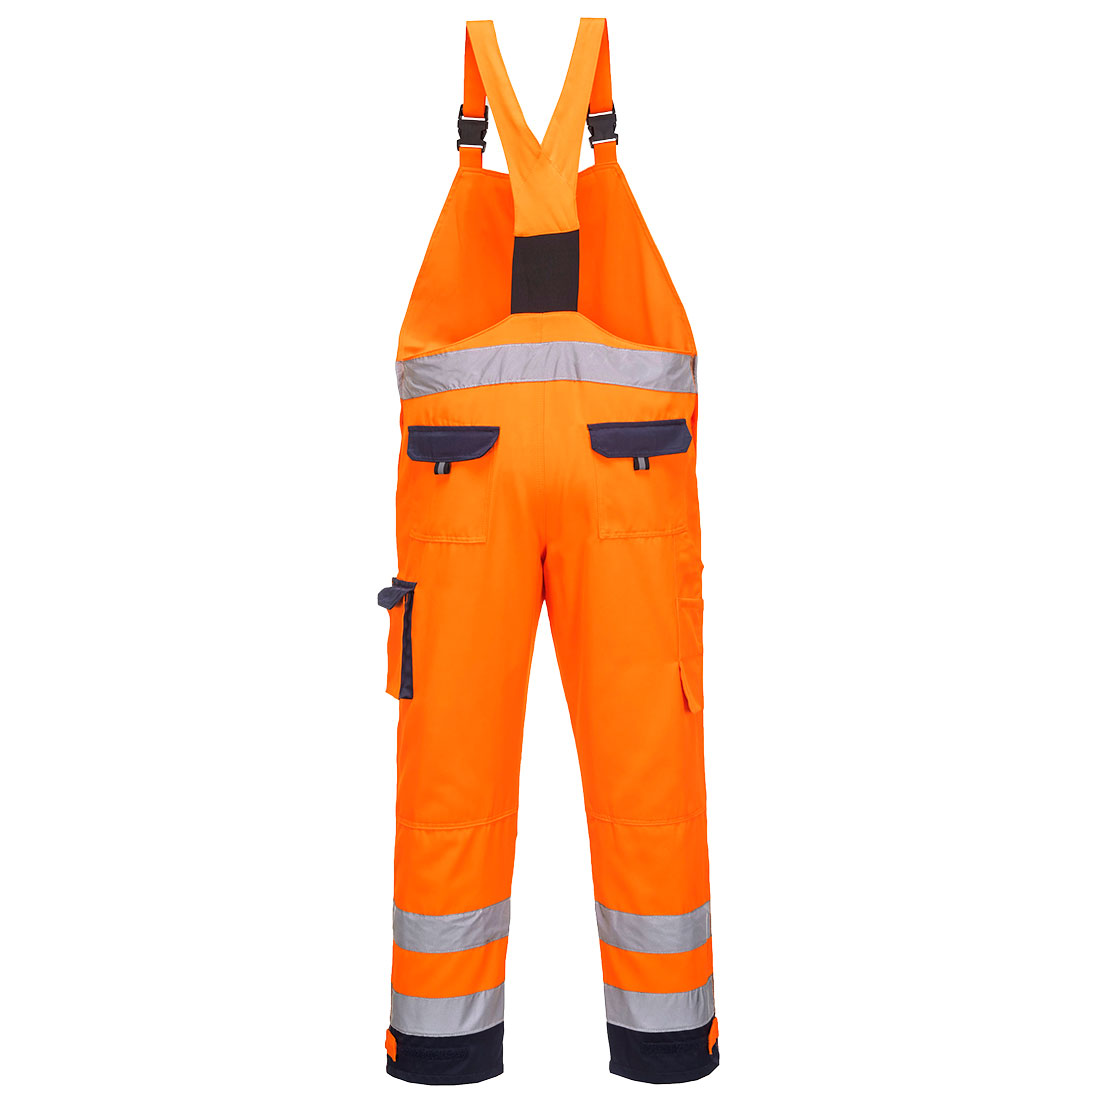 Hi-Vis Moden Style Bib and Brace with Texpel stain resistant finished